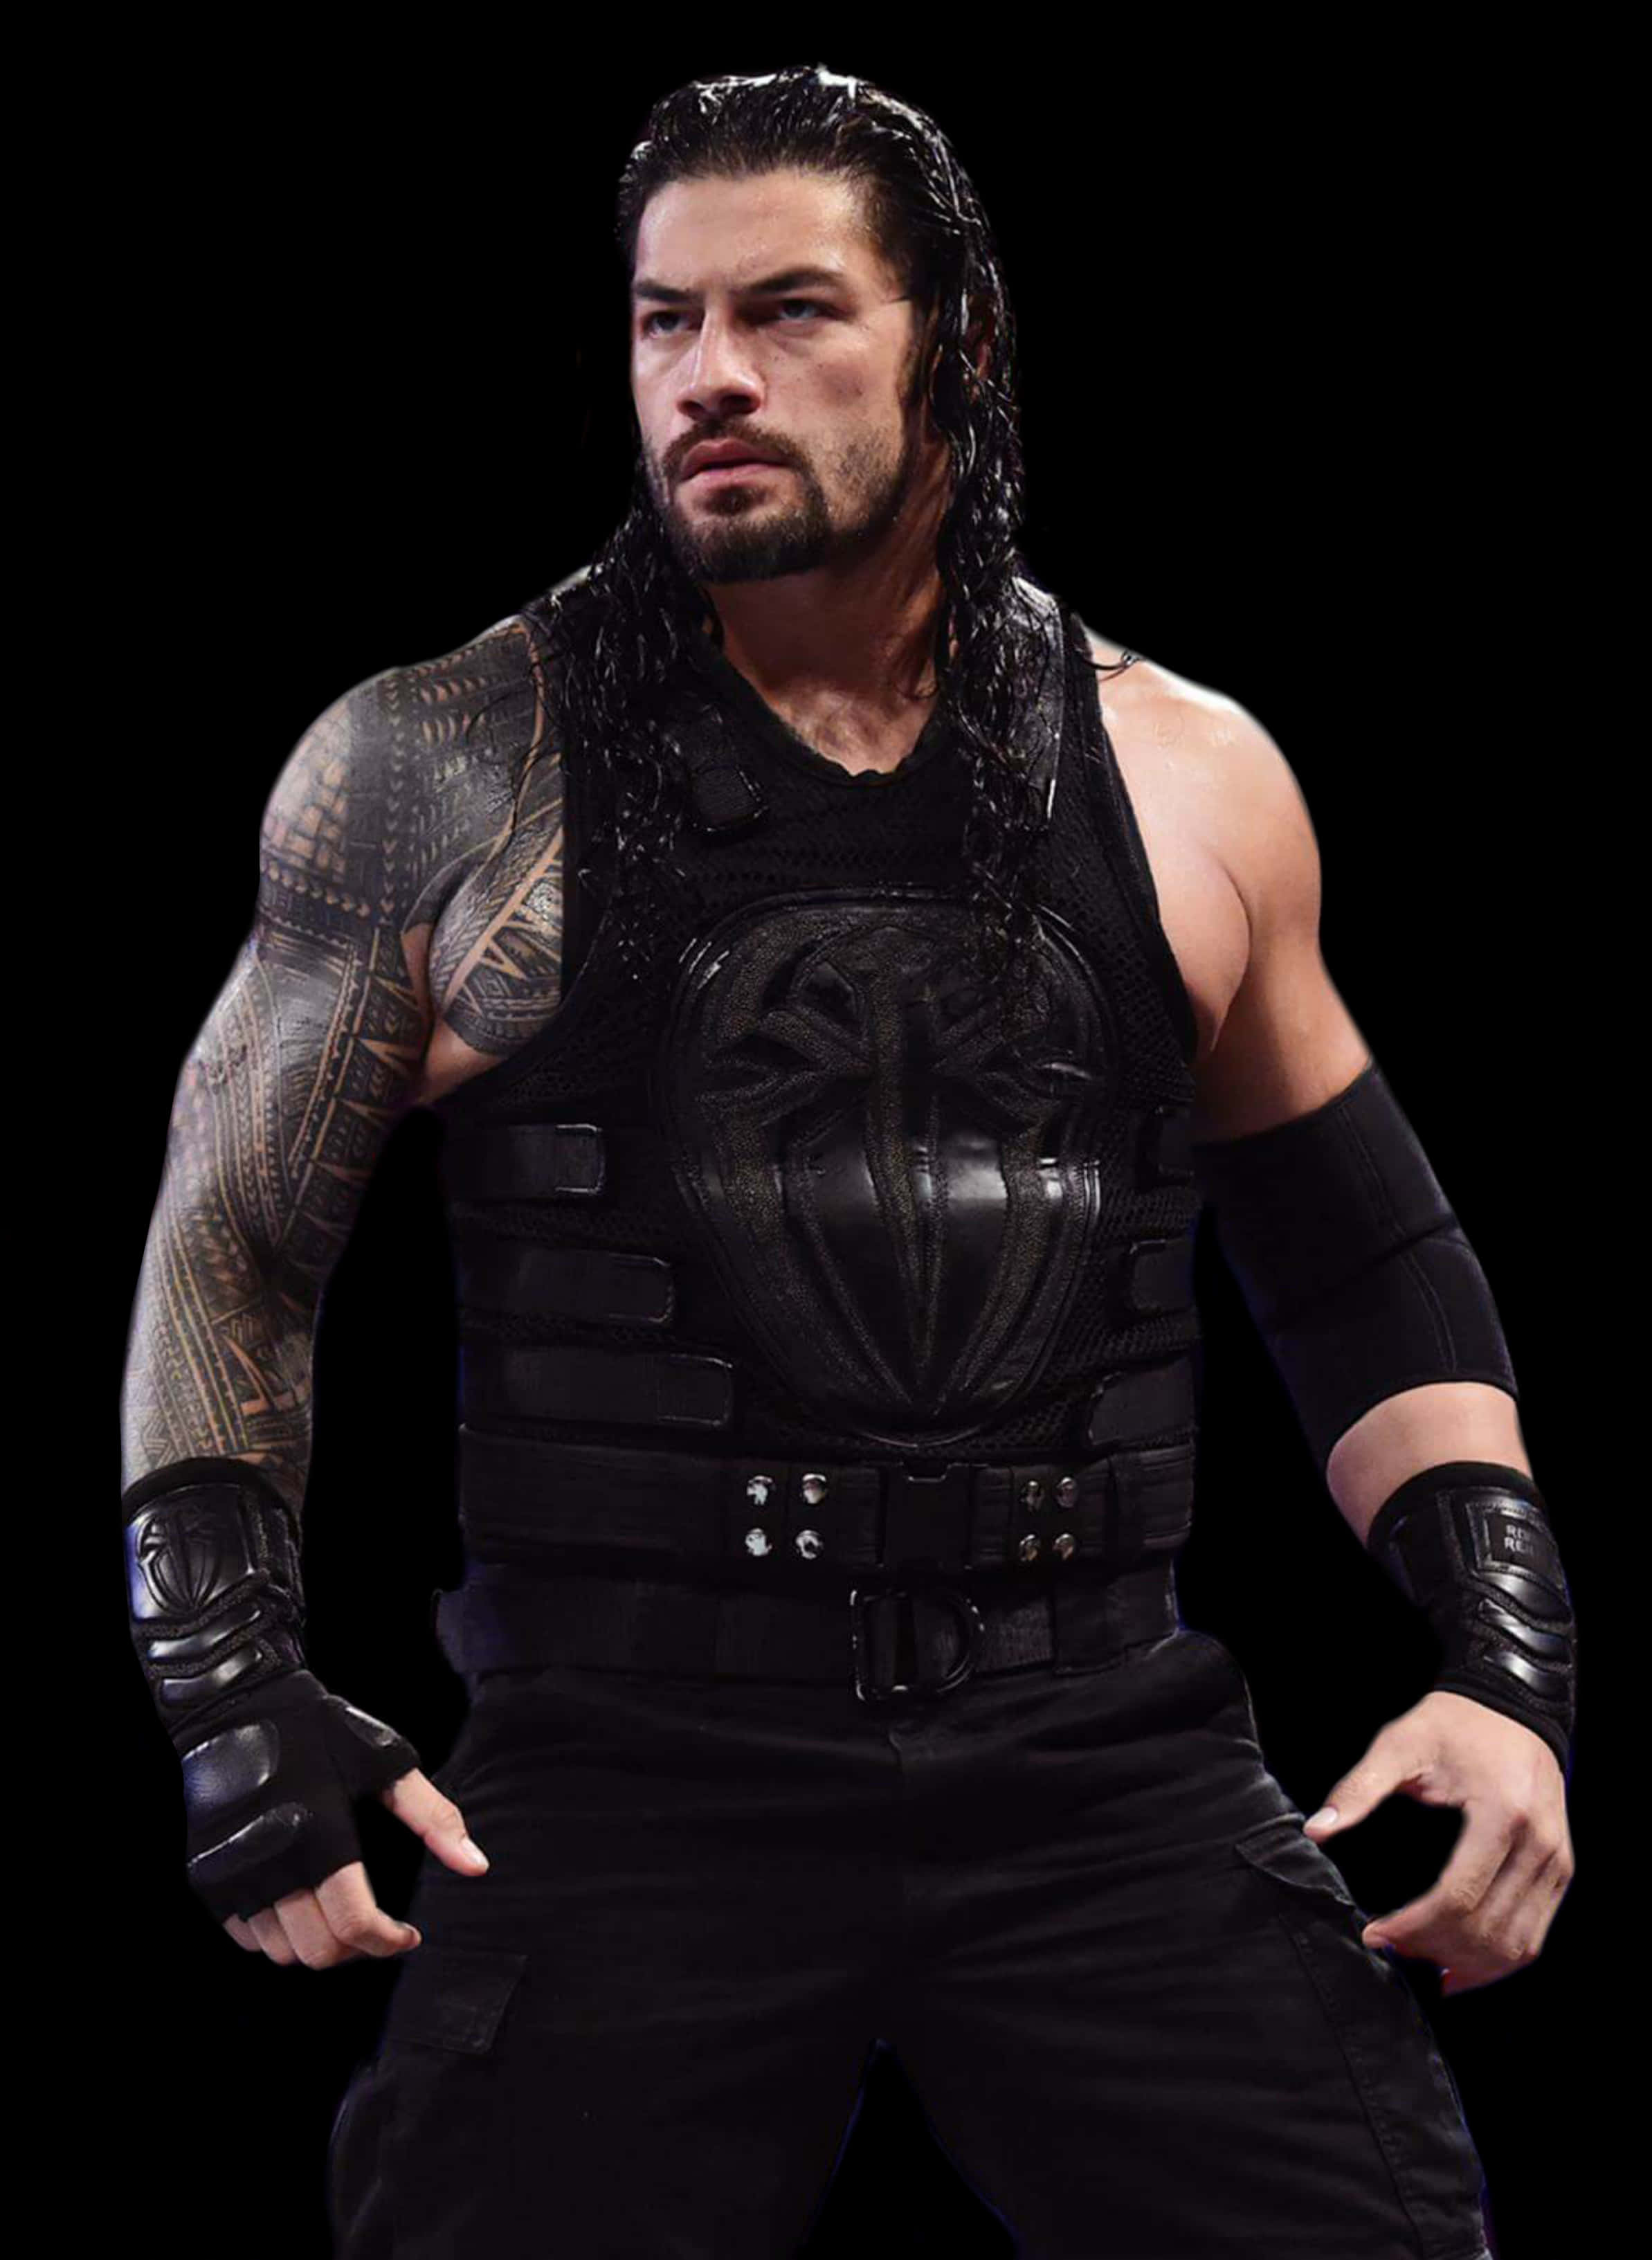 Roman Reigns Looking To The Side